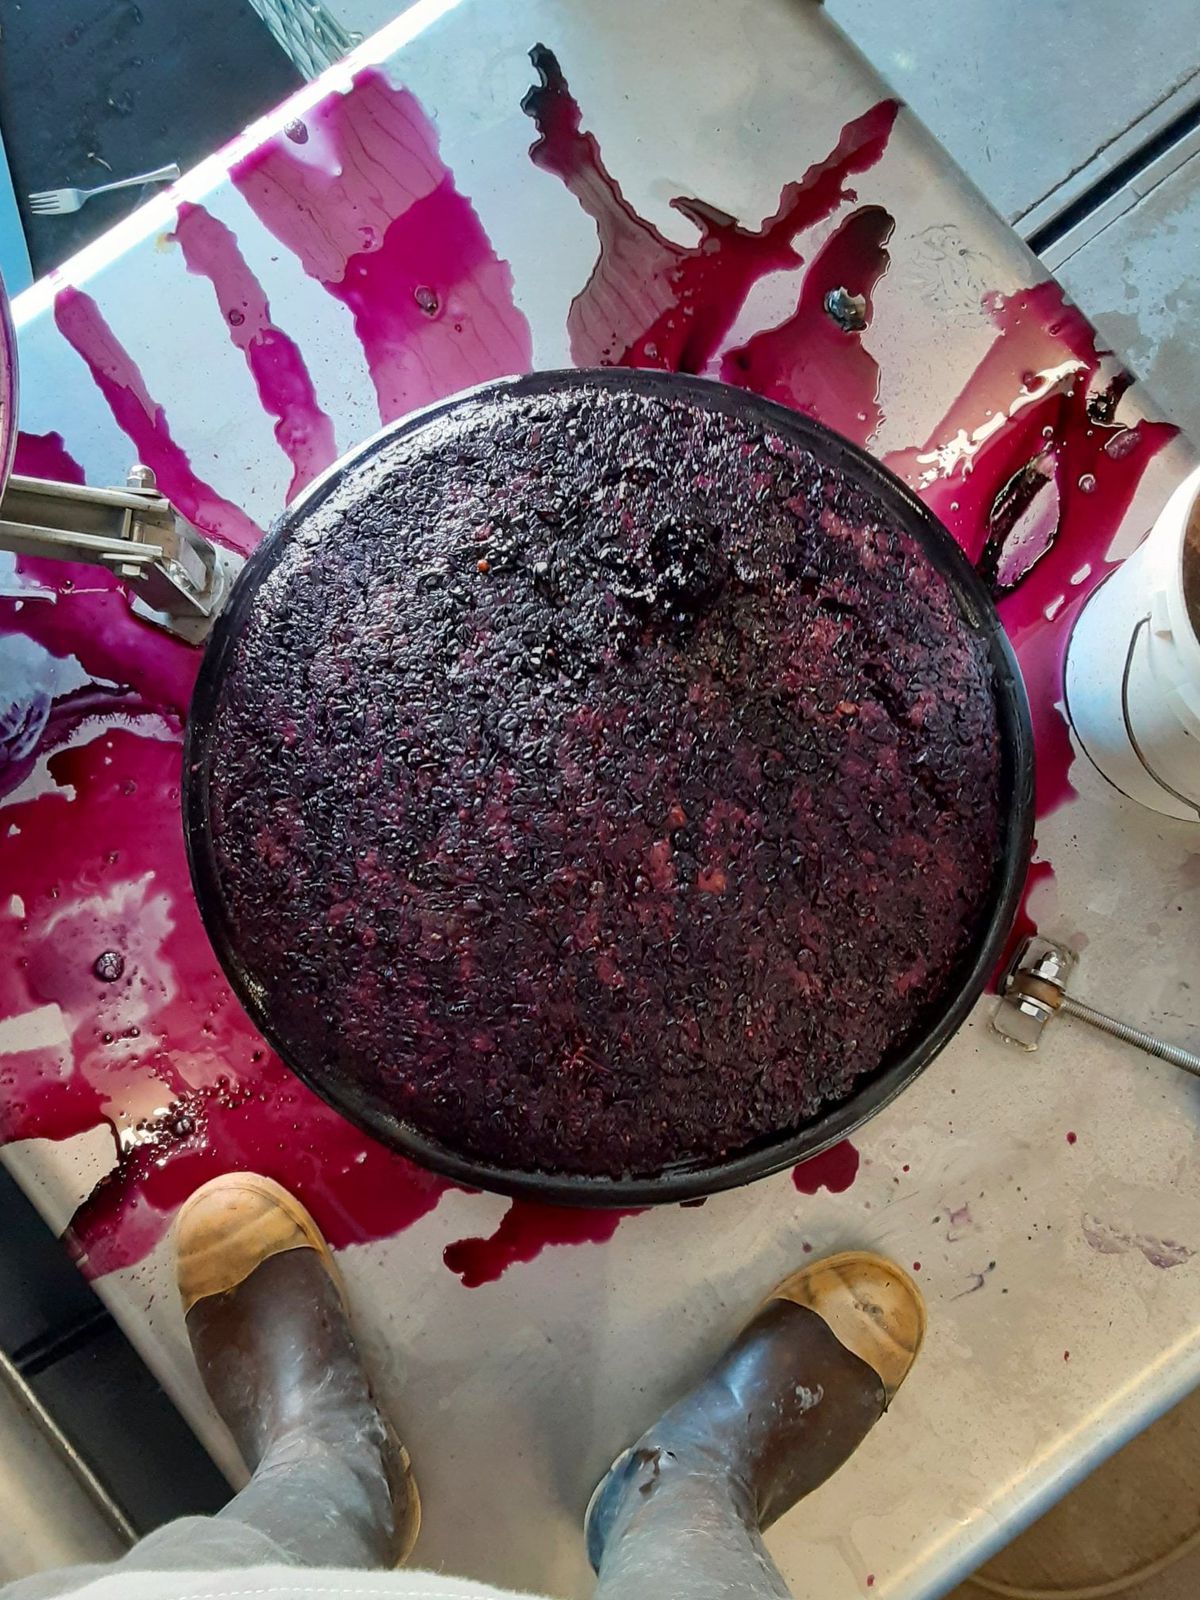 A container full of mushed-up purple grapes and wort with purple juice spilling on the floor, shot from above